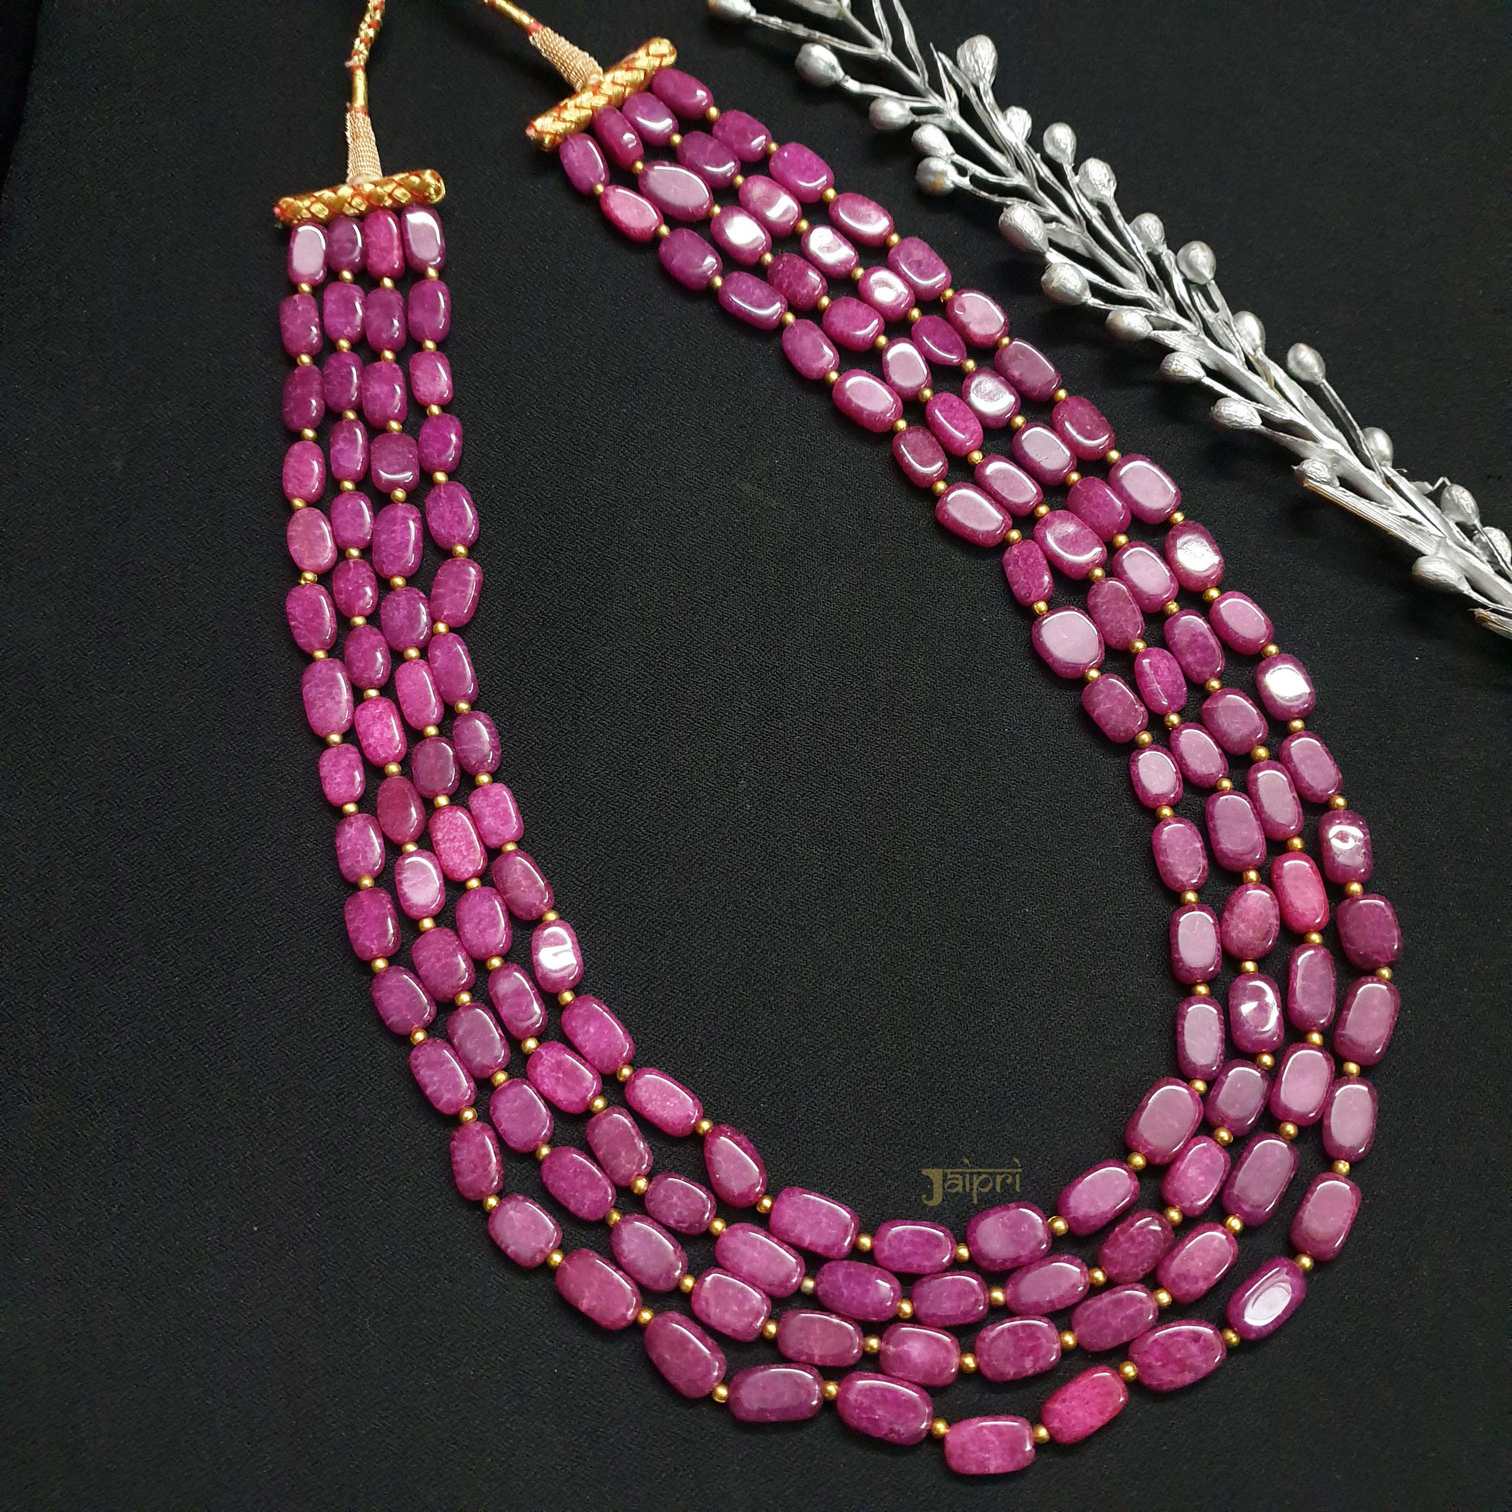 Multilayered Pink Beads Stone Necklace